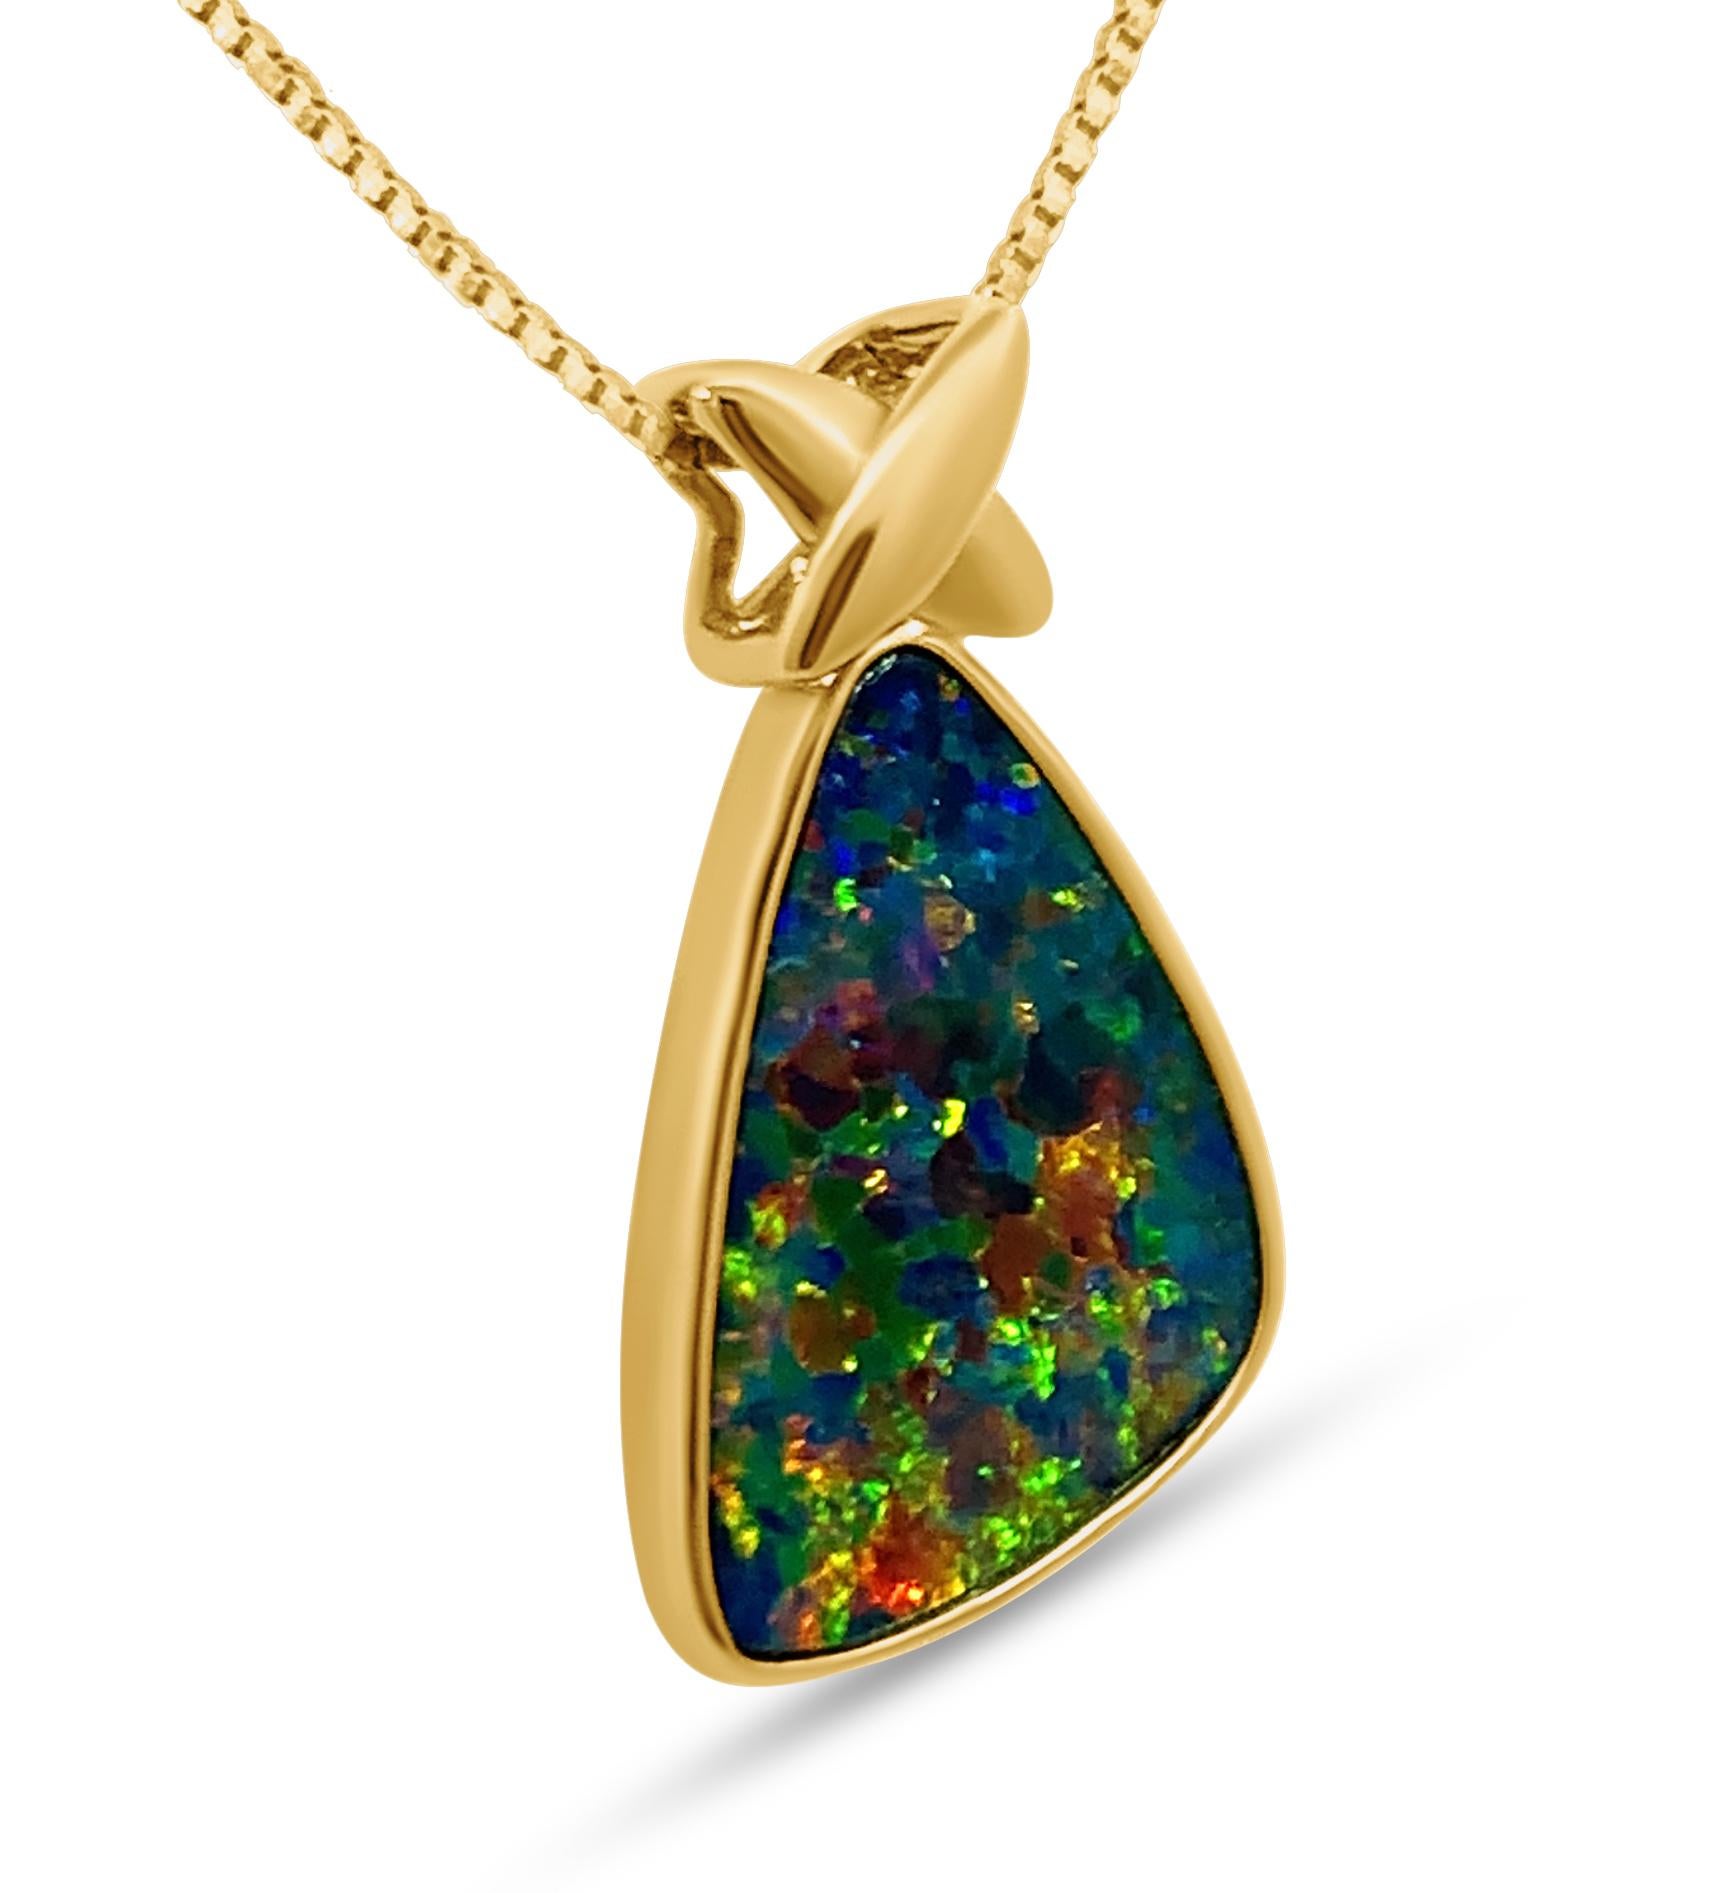 Contemporary Australian 4.86ct Premium Quality Opal Doublet Pendant in 18k Yellow Gold